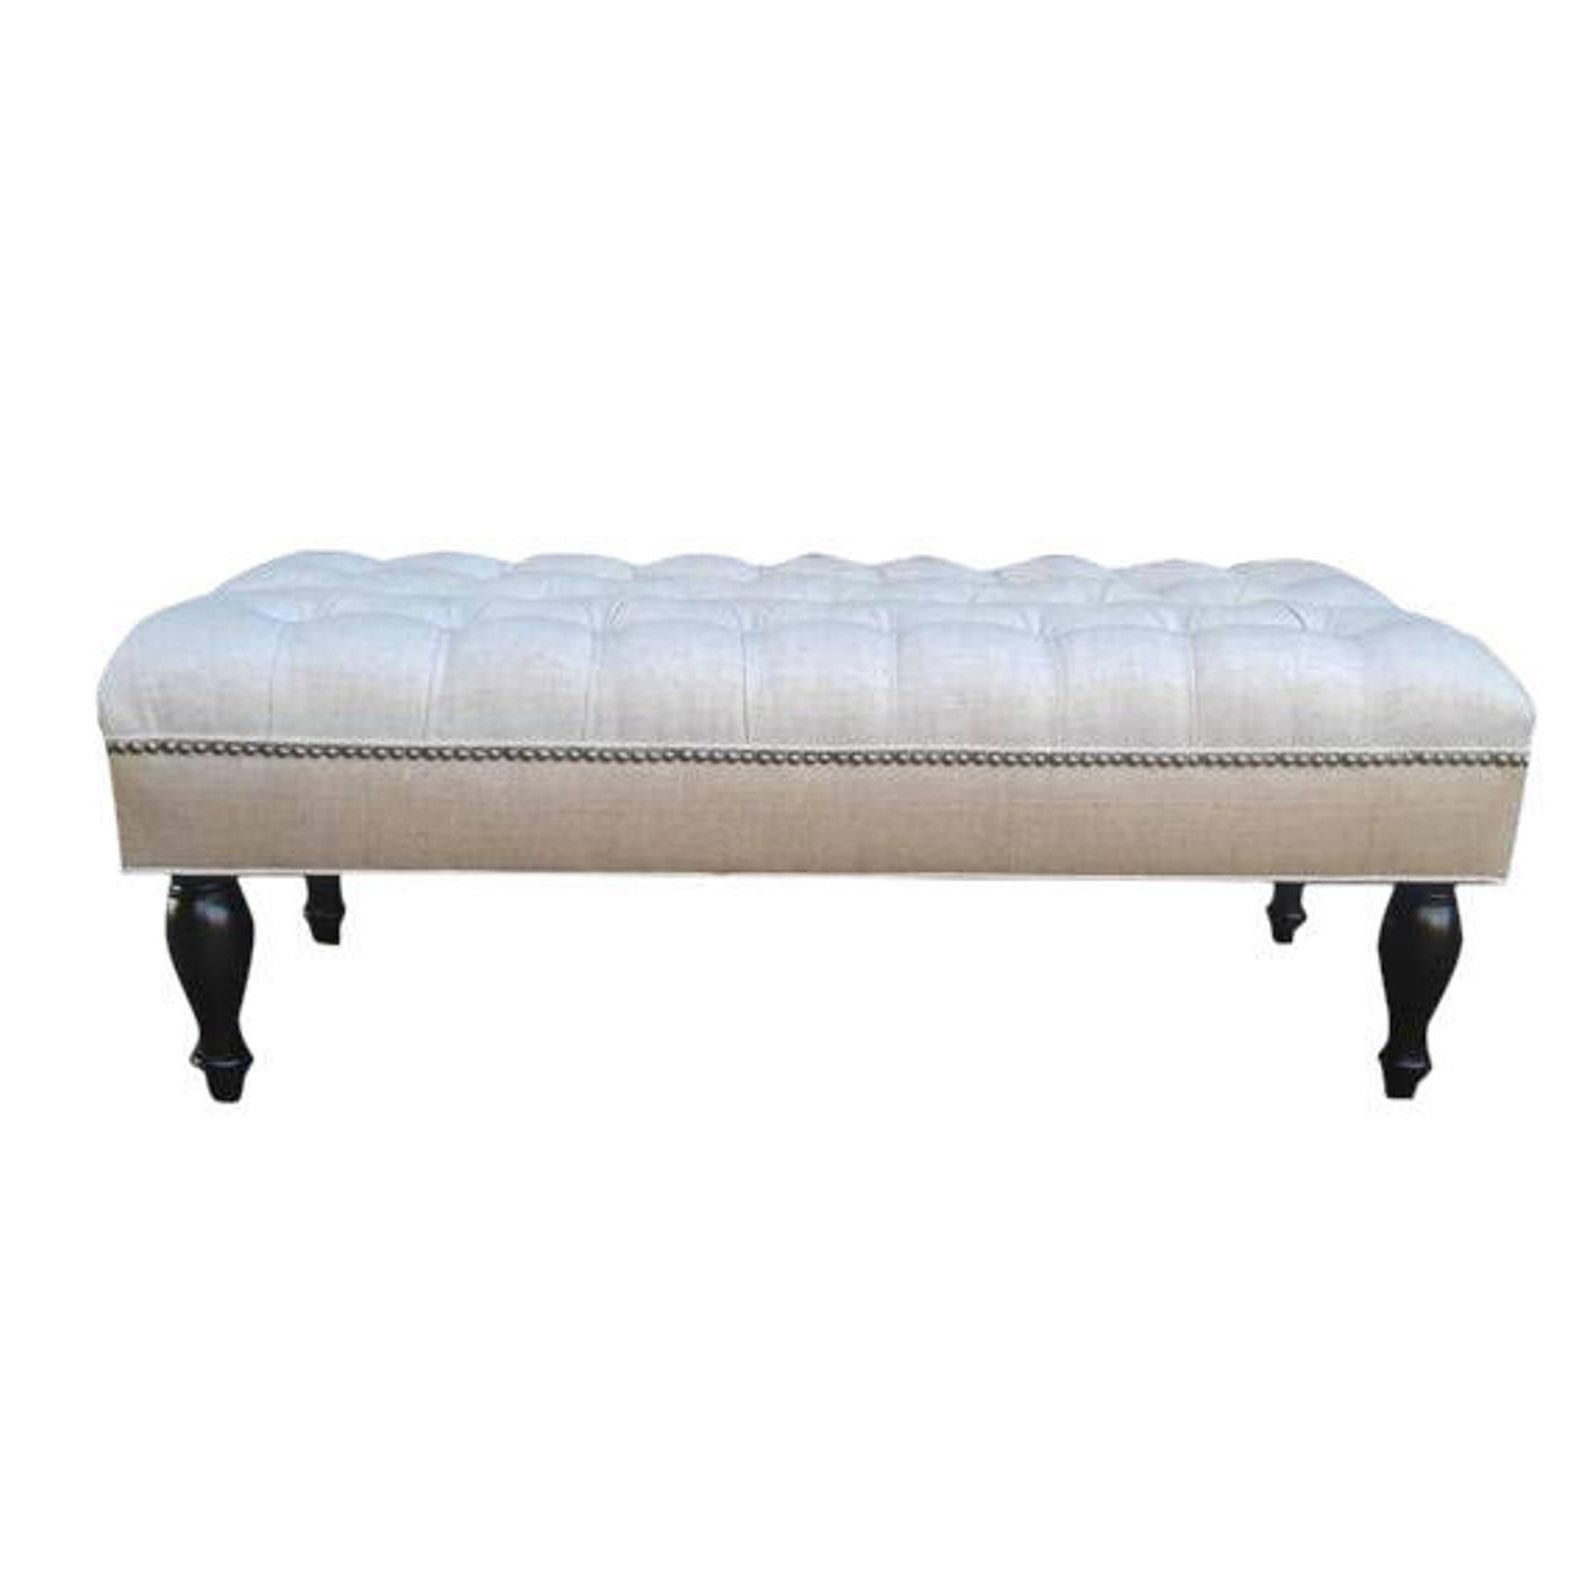 Current Linen And Burlap Upholstered Cocktail Ottoman  Bench – Tufted Ottoman Throughout Navy And Dark Brown Jute Pouf Ottomans (View 6 of 10)